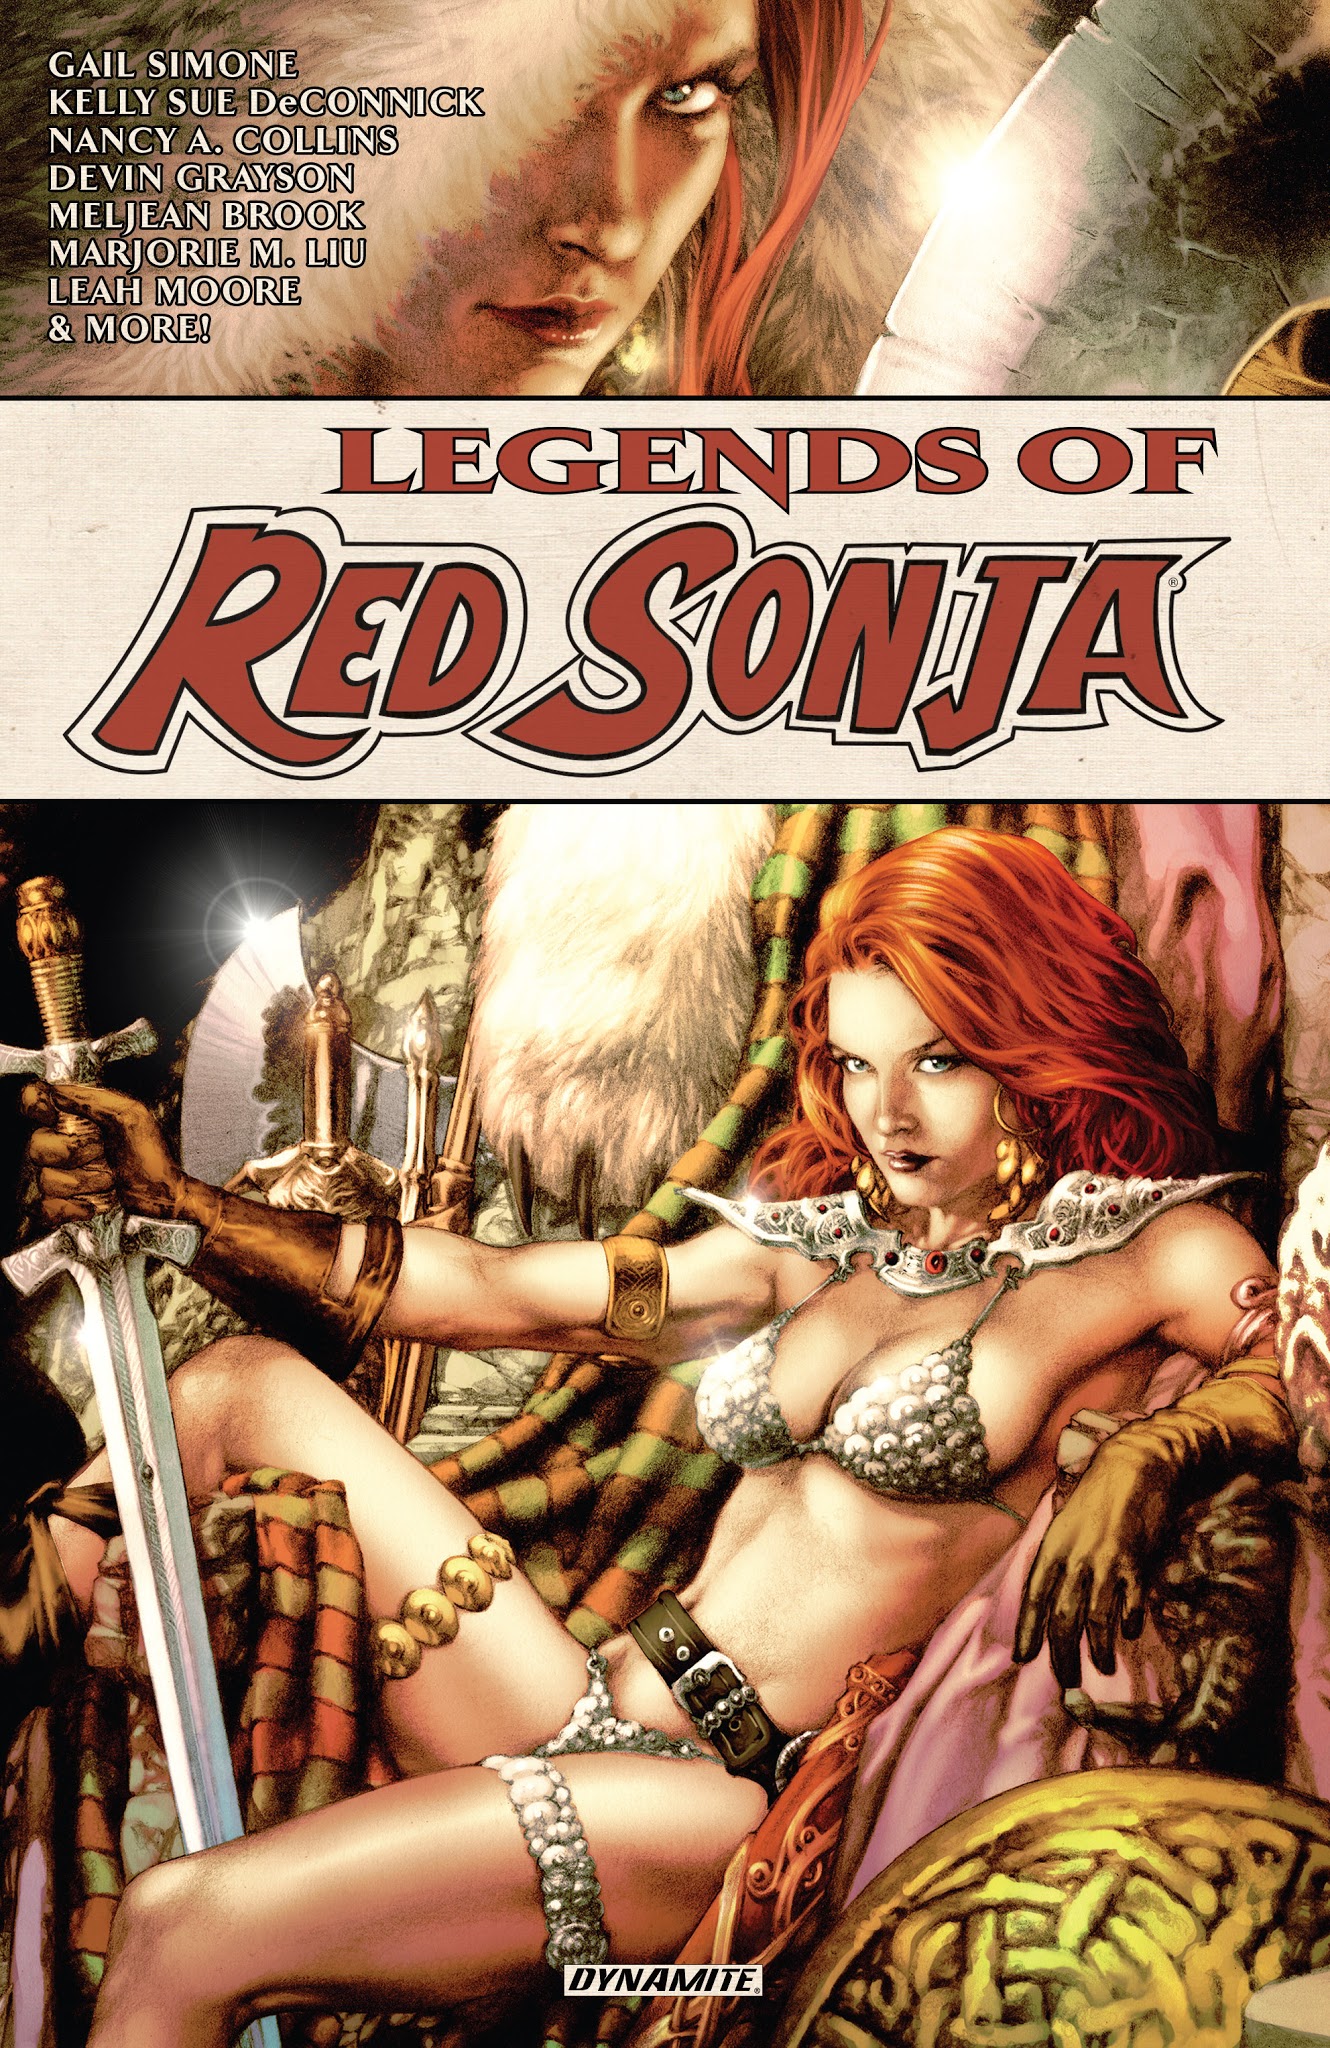 Read online Legends of Red Sonja comic -  Issue # TPB - 1